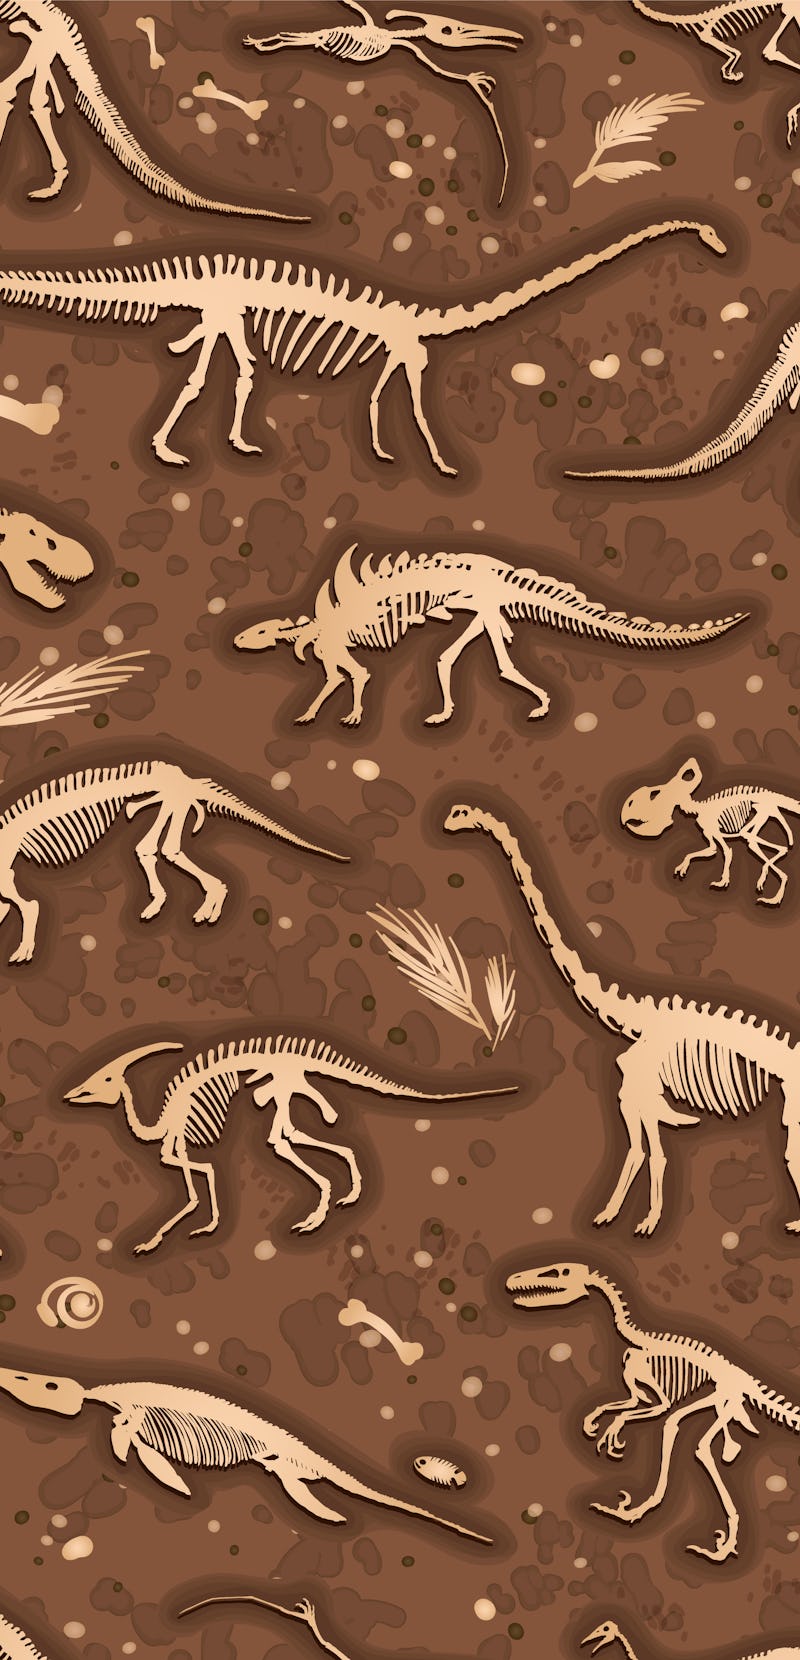 Set, silhouettes, dino skeletons, dinosaurs, fossils. Hand drawn vector illustration. Seamless patte...